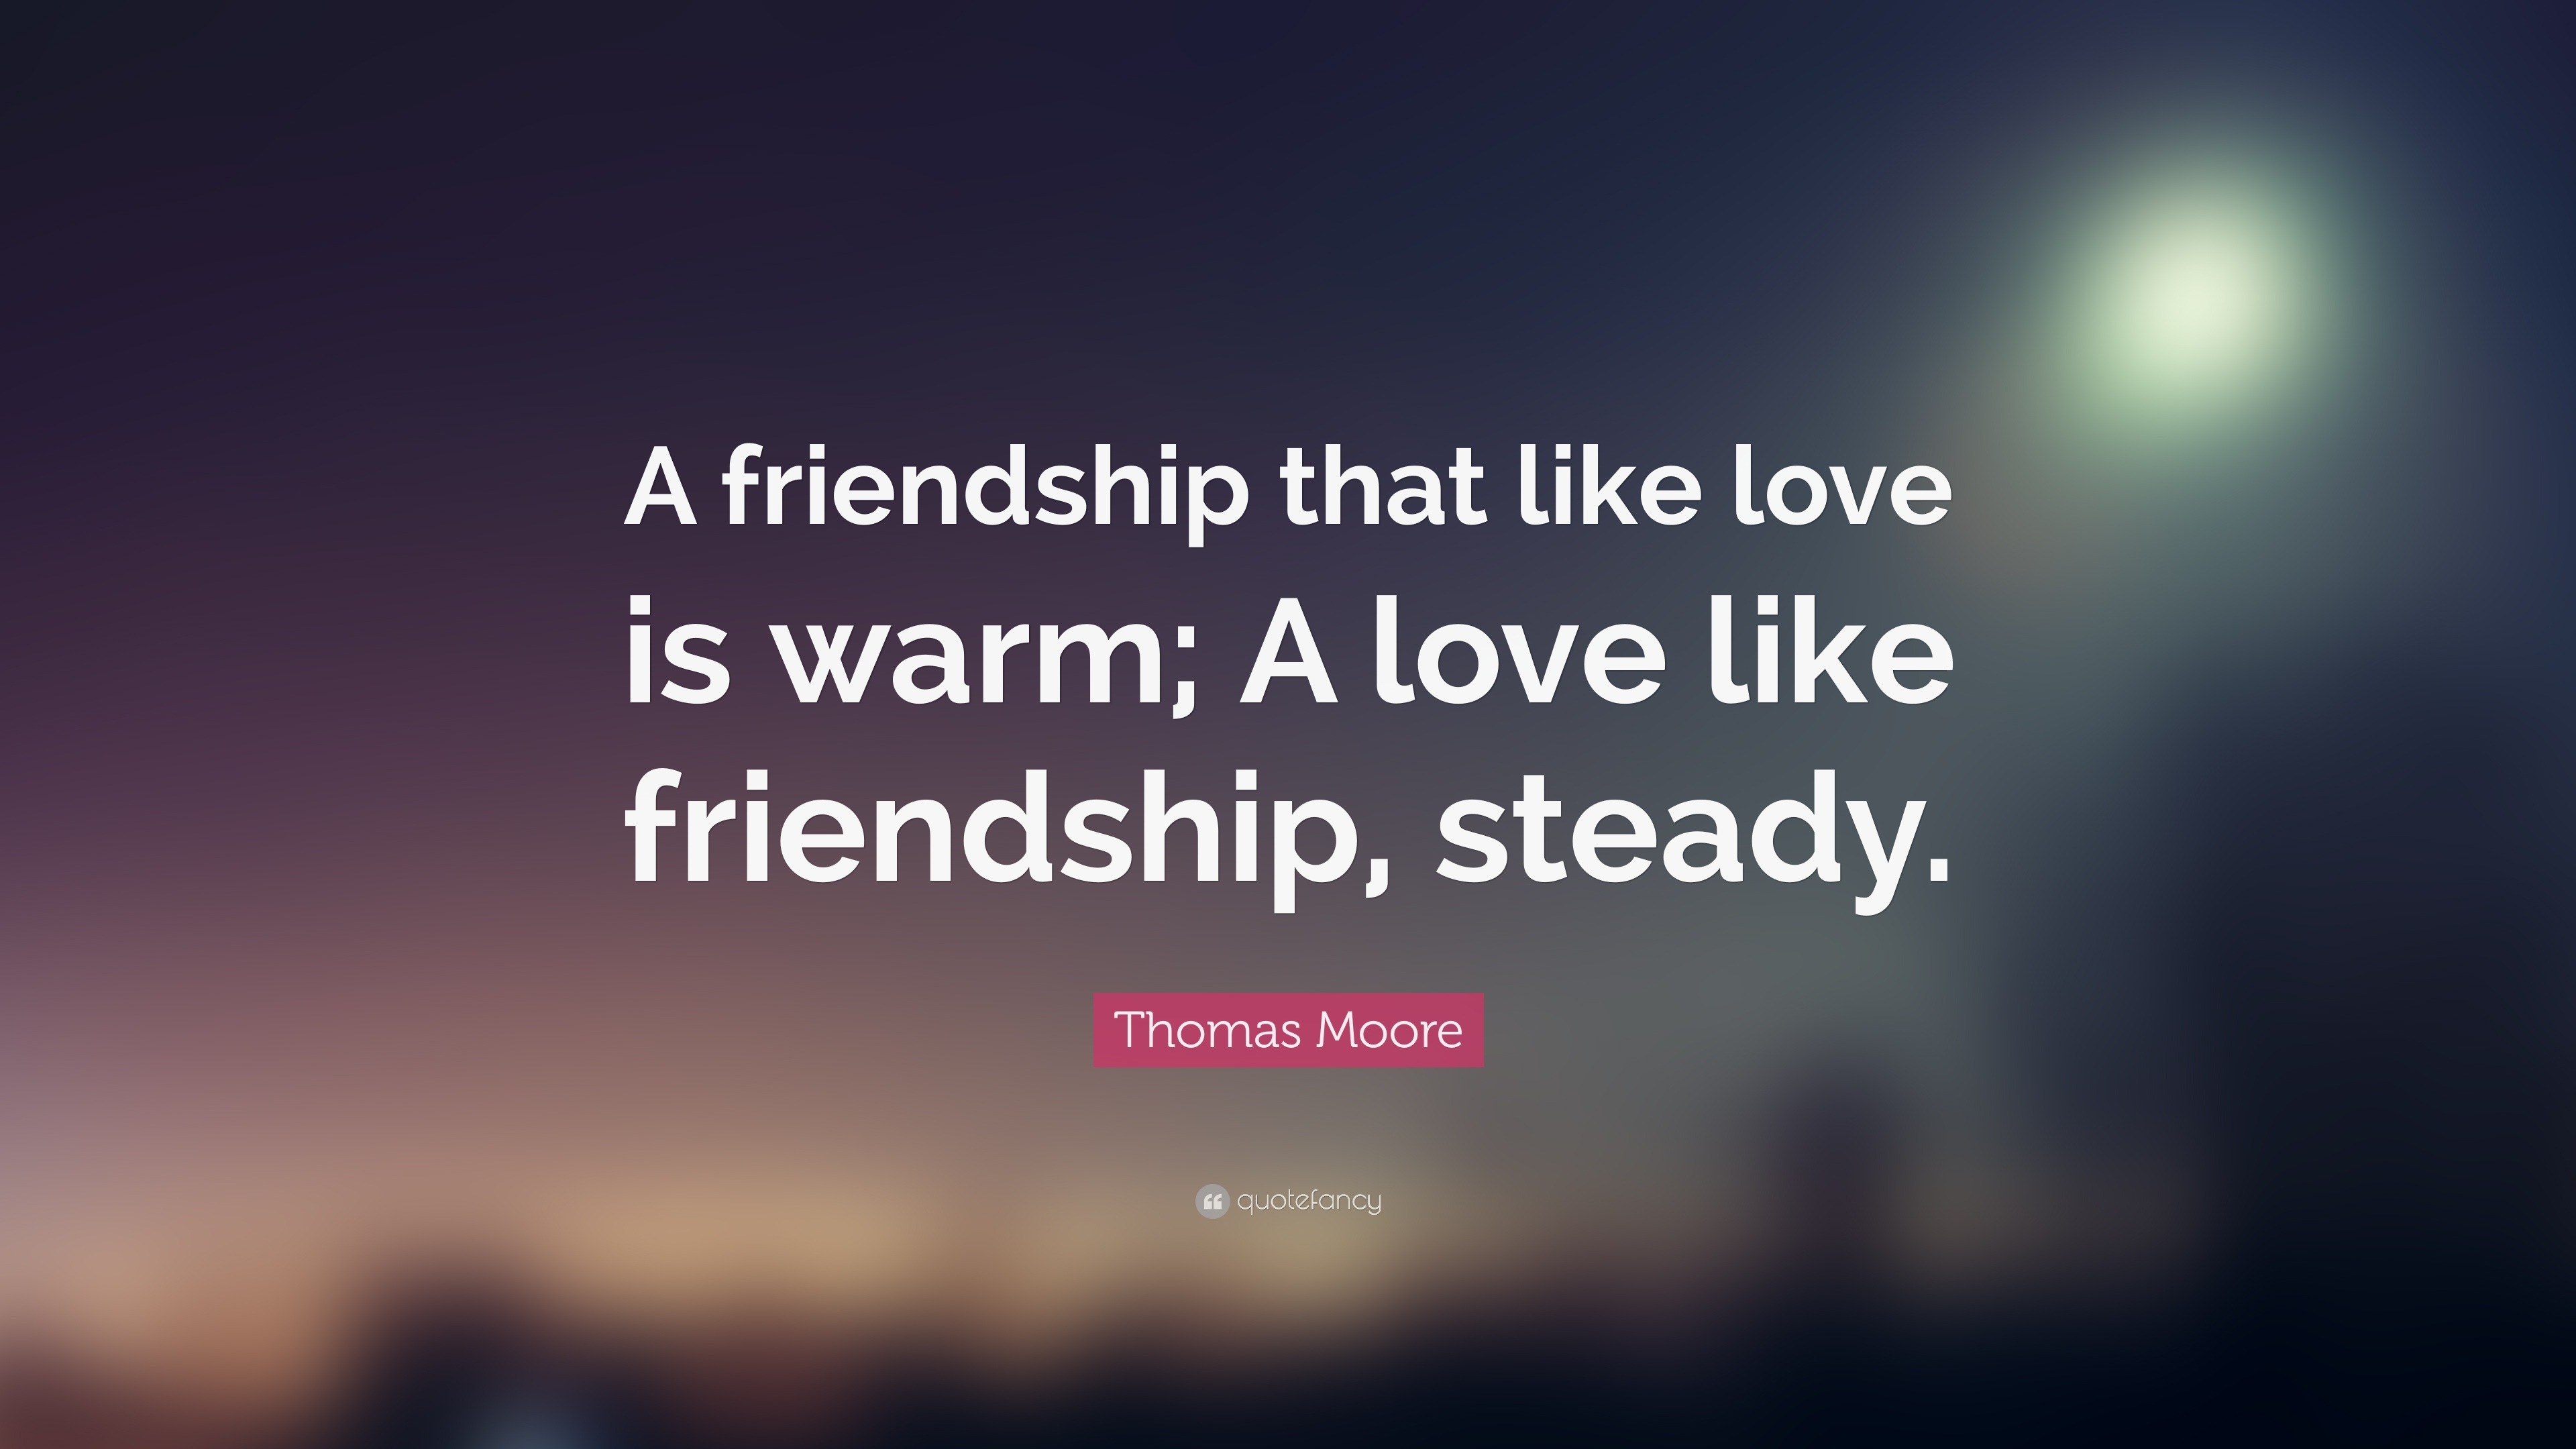 Thomas Moore Quote “A friendship that like love is warm A love like